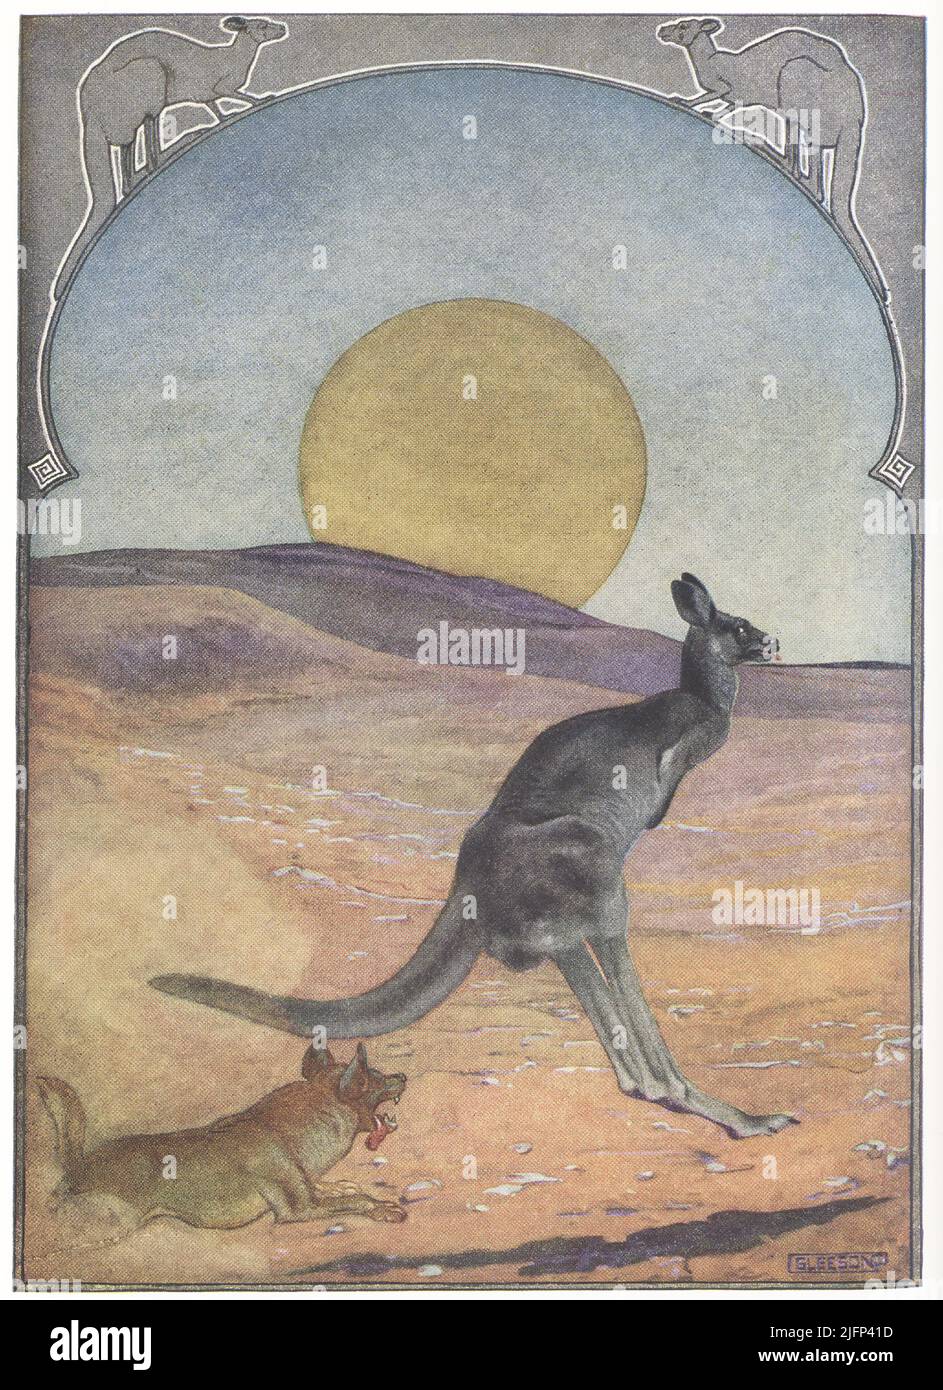 This 1912 image by J M Gleeson illustrates Kipling’s The Sing Song of Old Man Kanagroo. The Kangaroo used to have four short legs. He asked Little God Nqa to make him different from all other animals by five o’clock that afternoon and was told to go away. He asked Middle God Nquing the same, also to be “wonderfully popular,” and received the same answer. But when he asked Big God Nqong to be different, popular and “wonderfully run after” Nqong called up Yellow Dog Dingo. The Kangaroo was chased by the Dingo all across Australia till his legs ached. He came to a river and hopped across it on hi Stock Photo